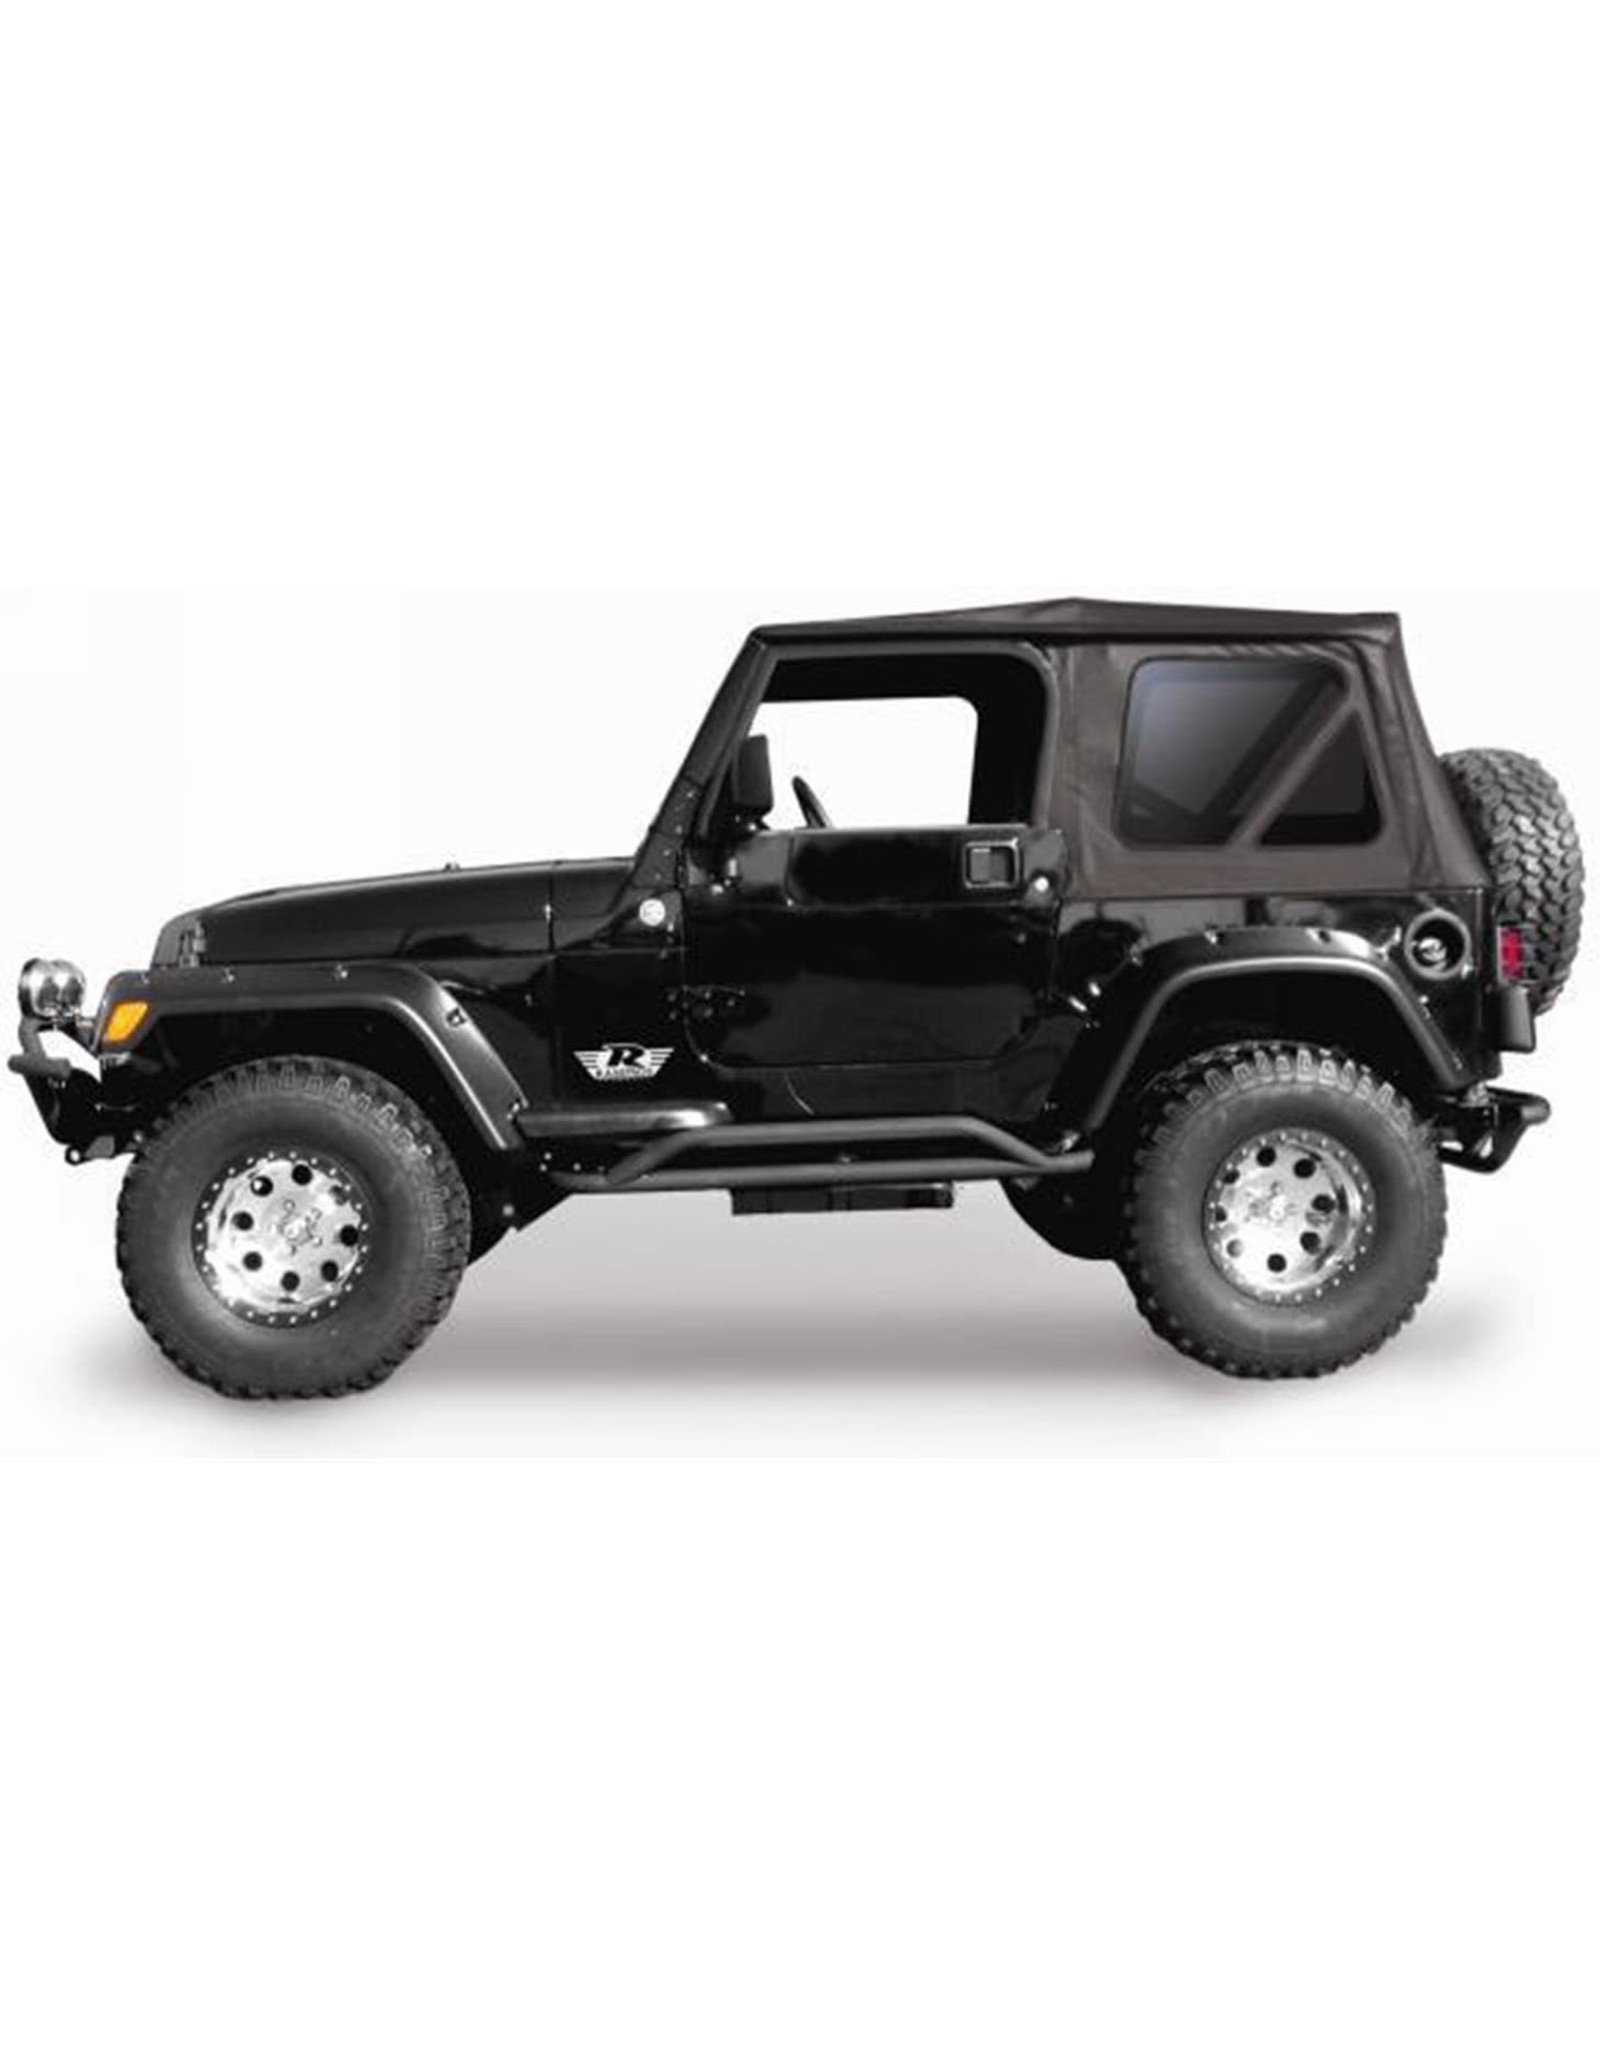 Rampage Complete Soft Top Vinyl, Black Diamond Color, includes Frame &  Hardware 68735 Fits 1997 - 2006 Jeep Wrangler TJ, with Full Steel Doors -  Amazing Bargains USA - Buffalo, NY